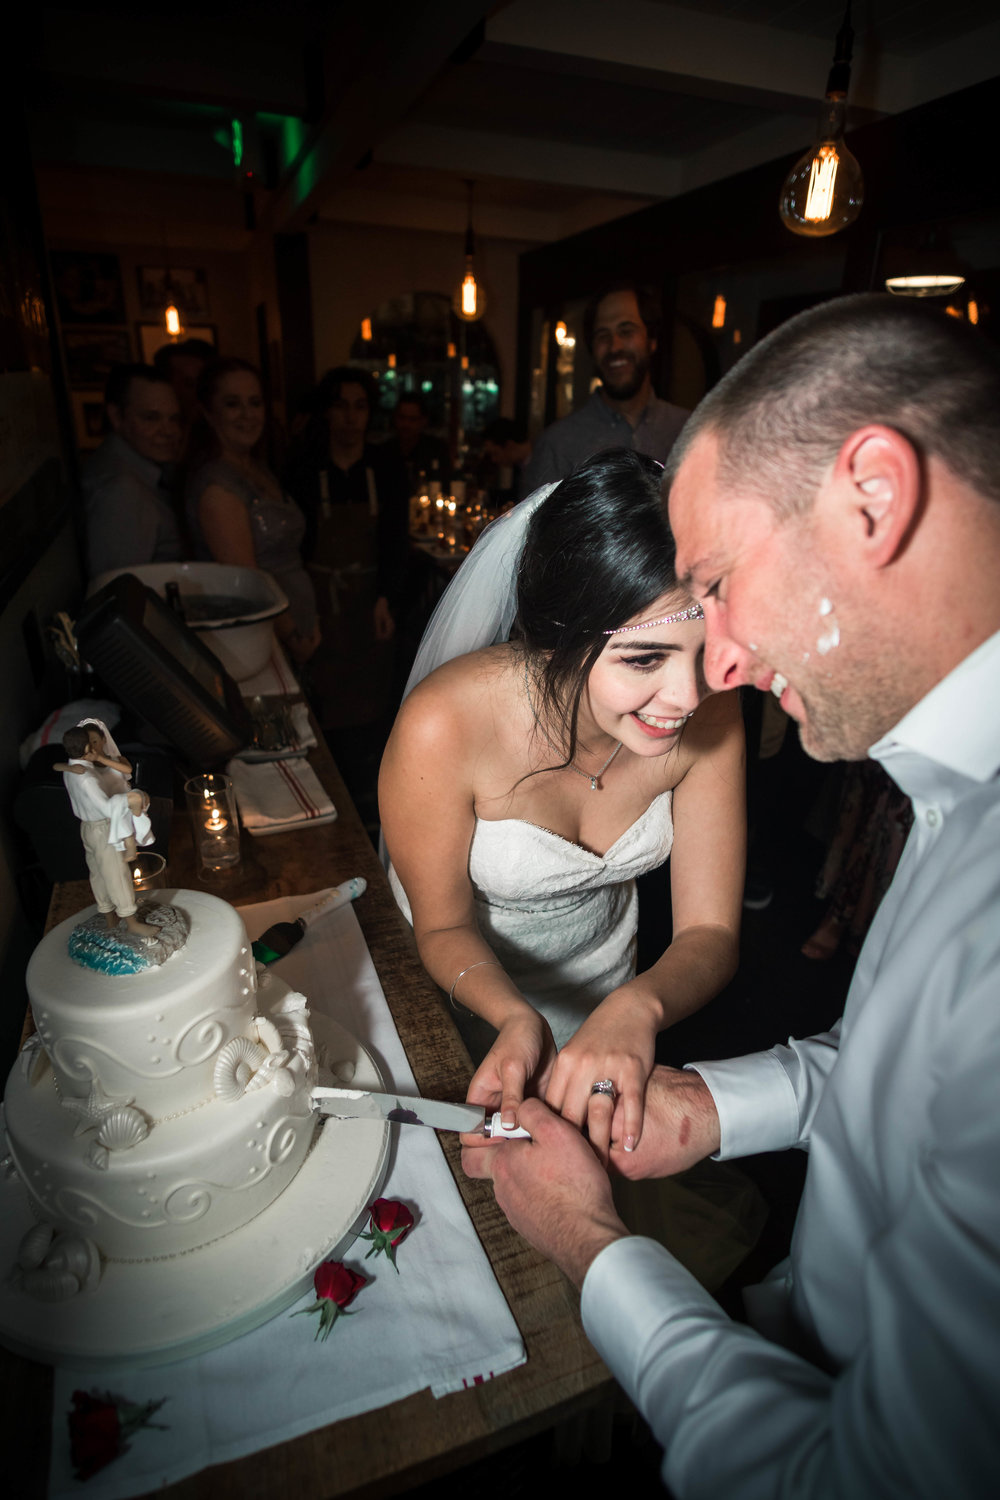 Bride and groom cutting The wedding cake And laughing